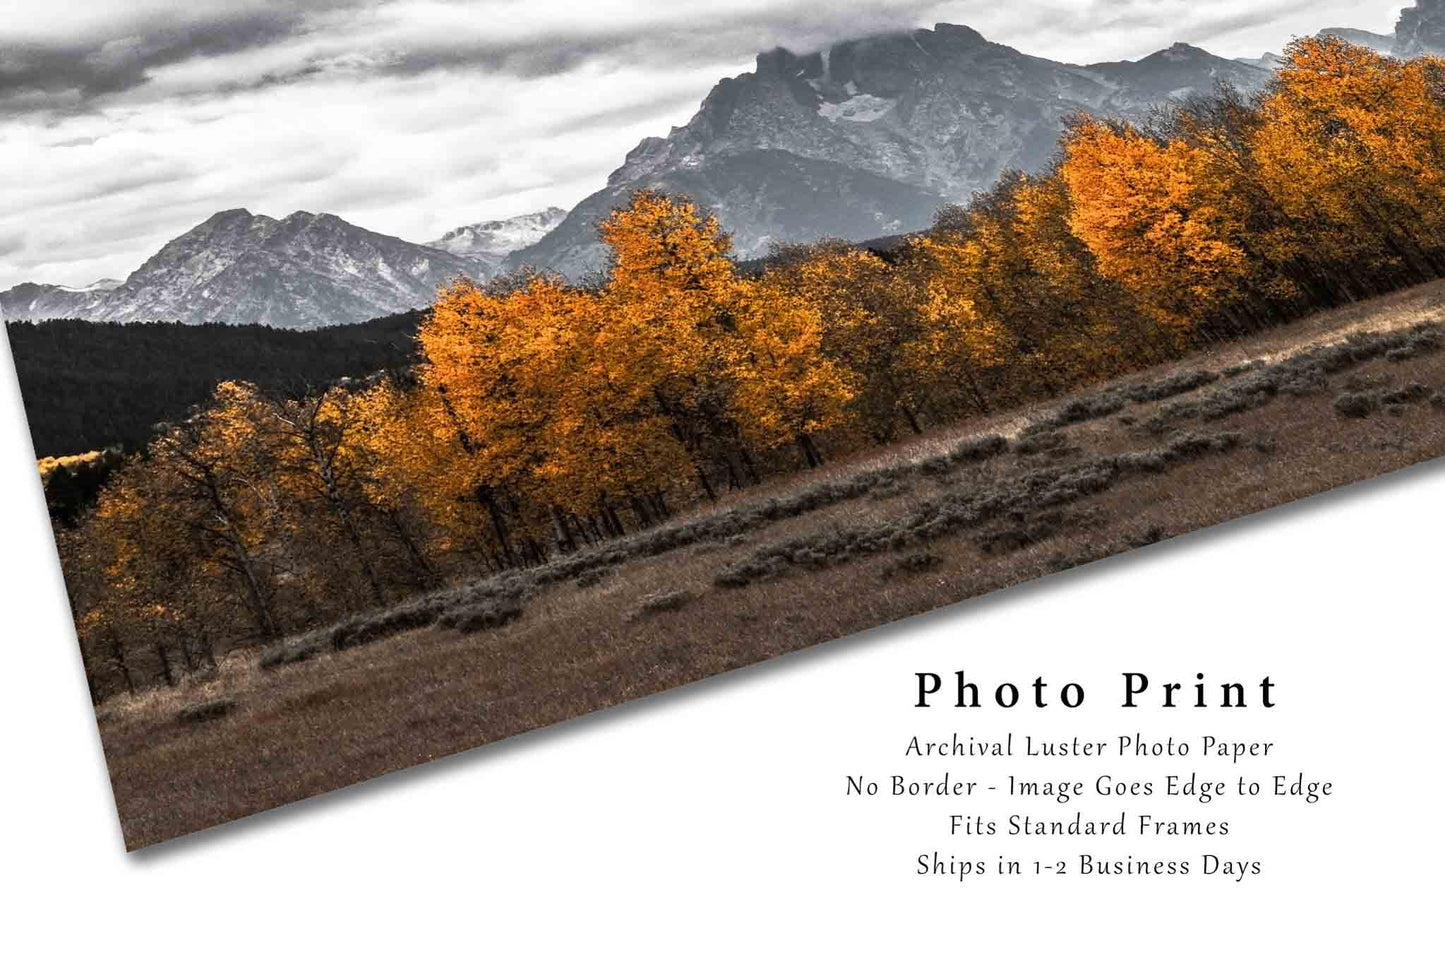 Grand Teton Photography Print - Modern Style Picture of Mt Moran in Black and White with Fall Colors in Aspen Trees in Western Wyoming